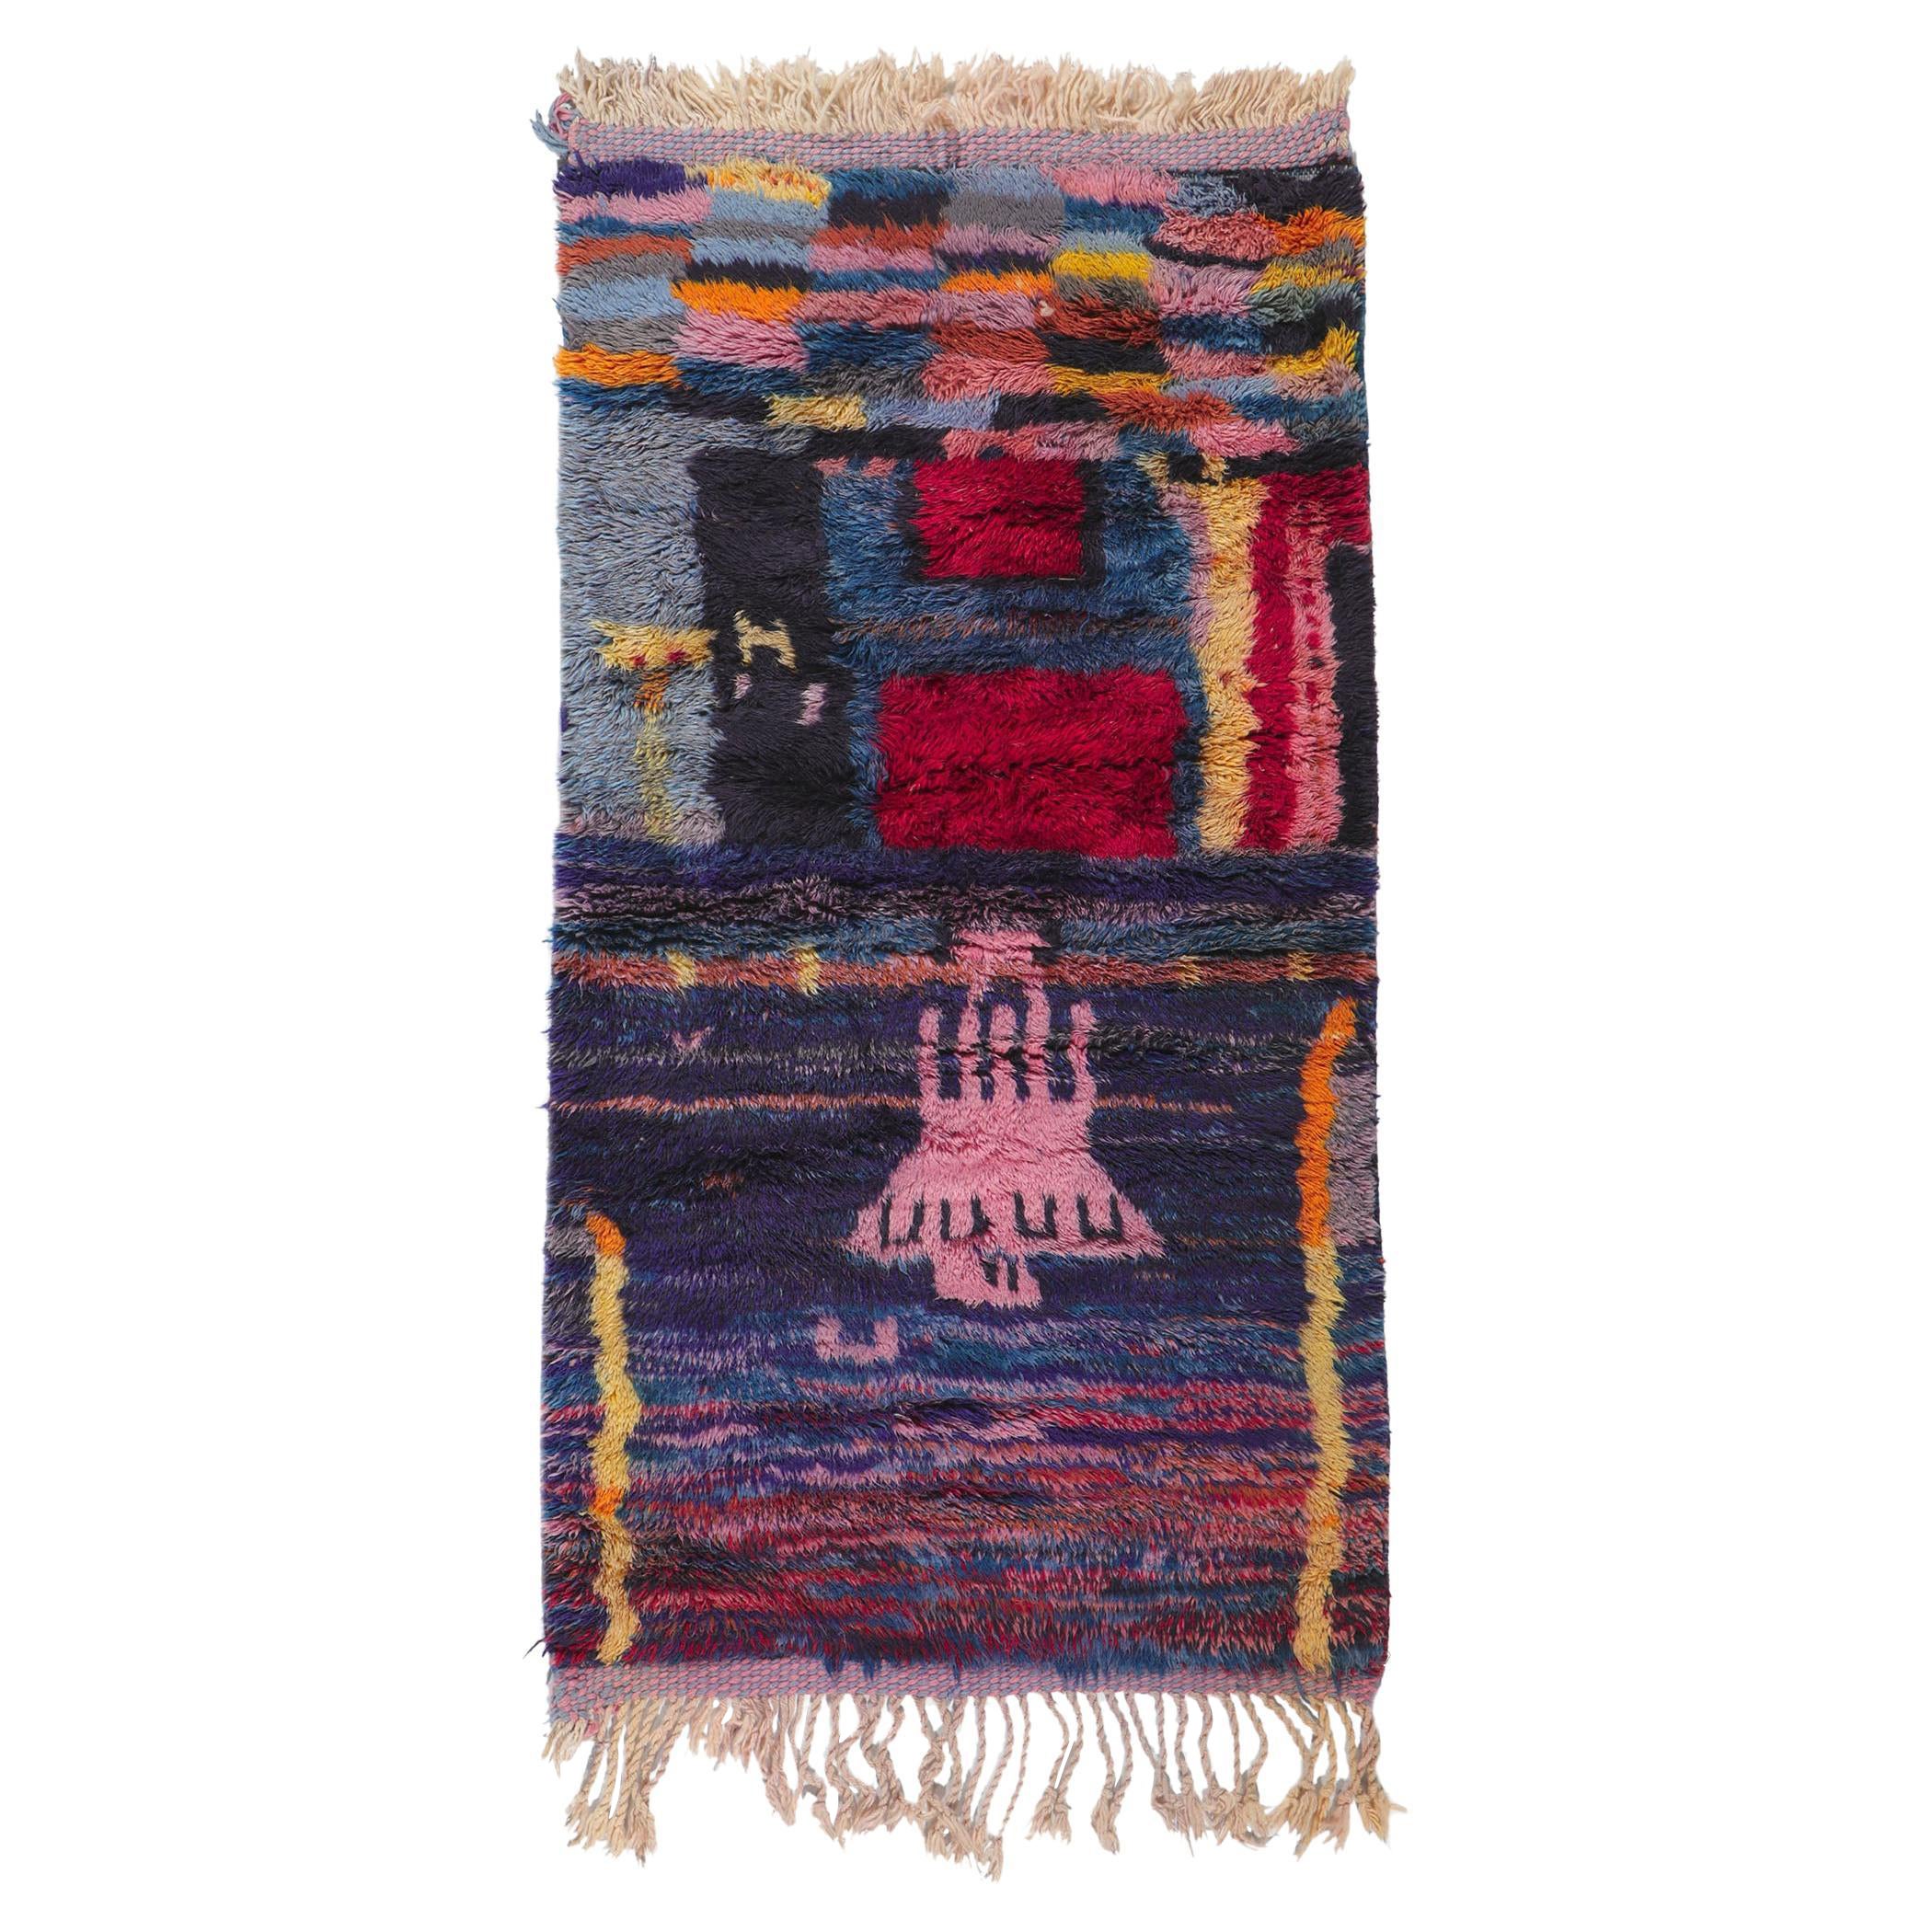 Contemporary Colorful Beni Ourain Moroccan Rug by Berber Tribes of Morocco For Sale